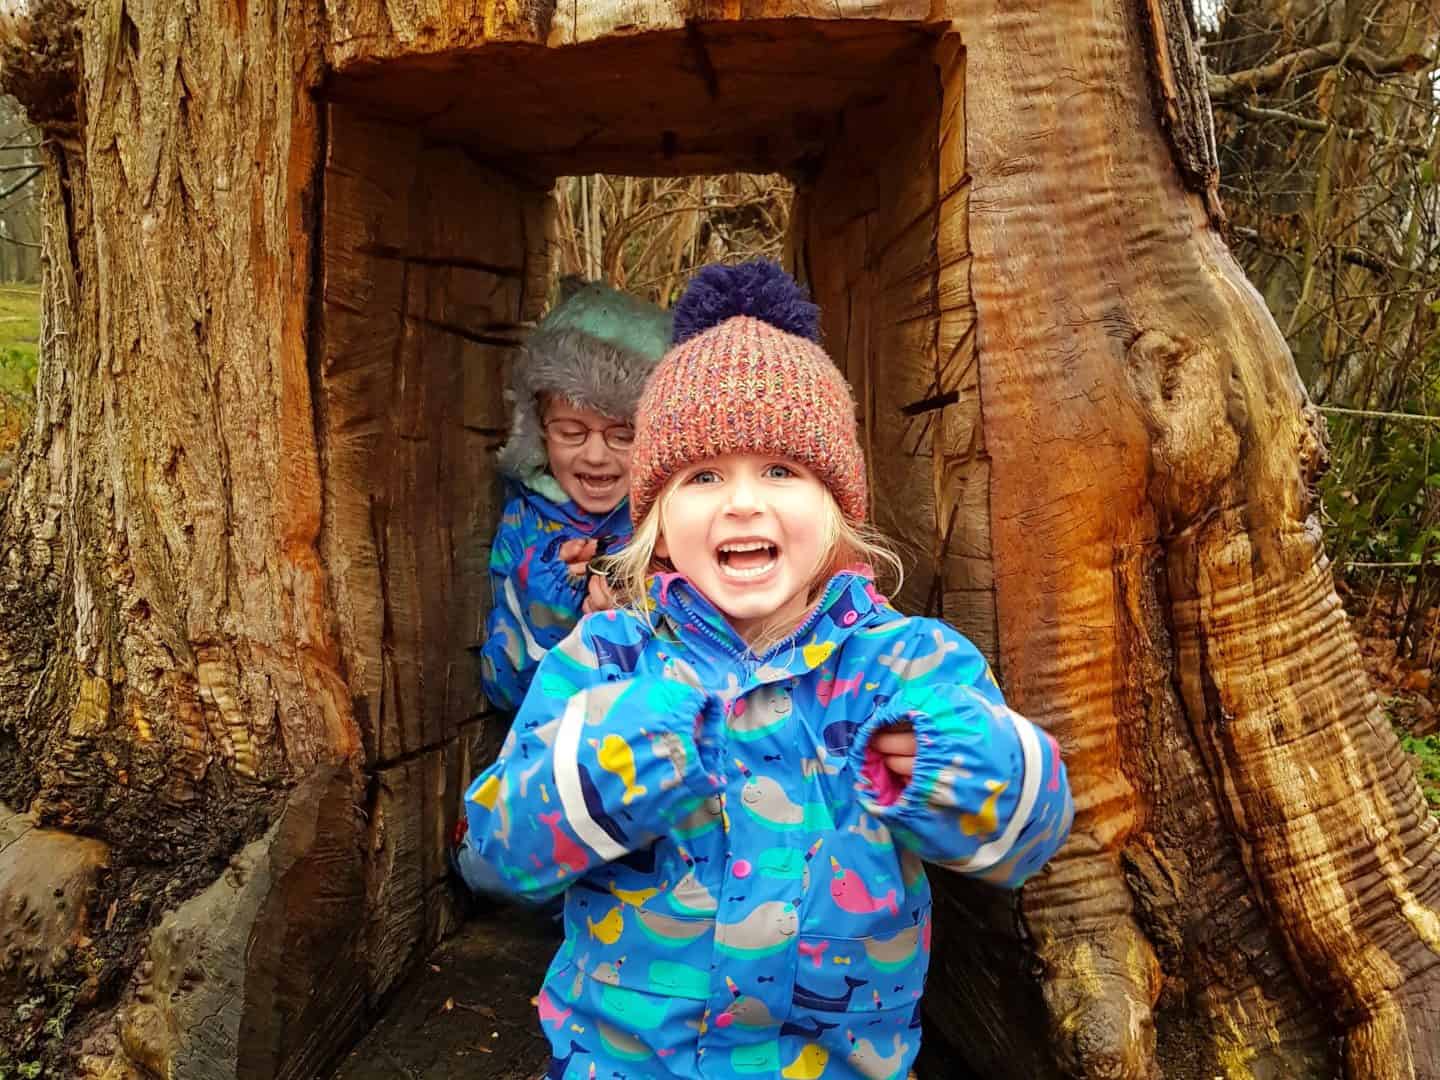 Girls playing inside a tree trunk at Croft Castle National Trust Herefordshire